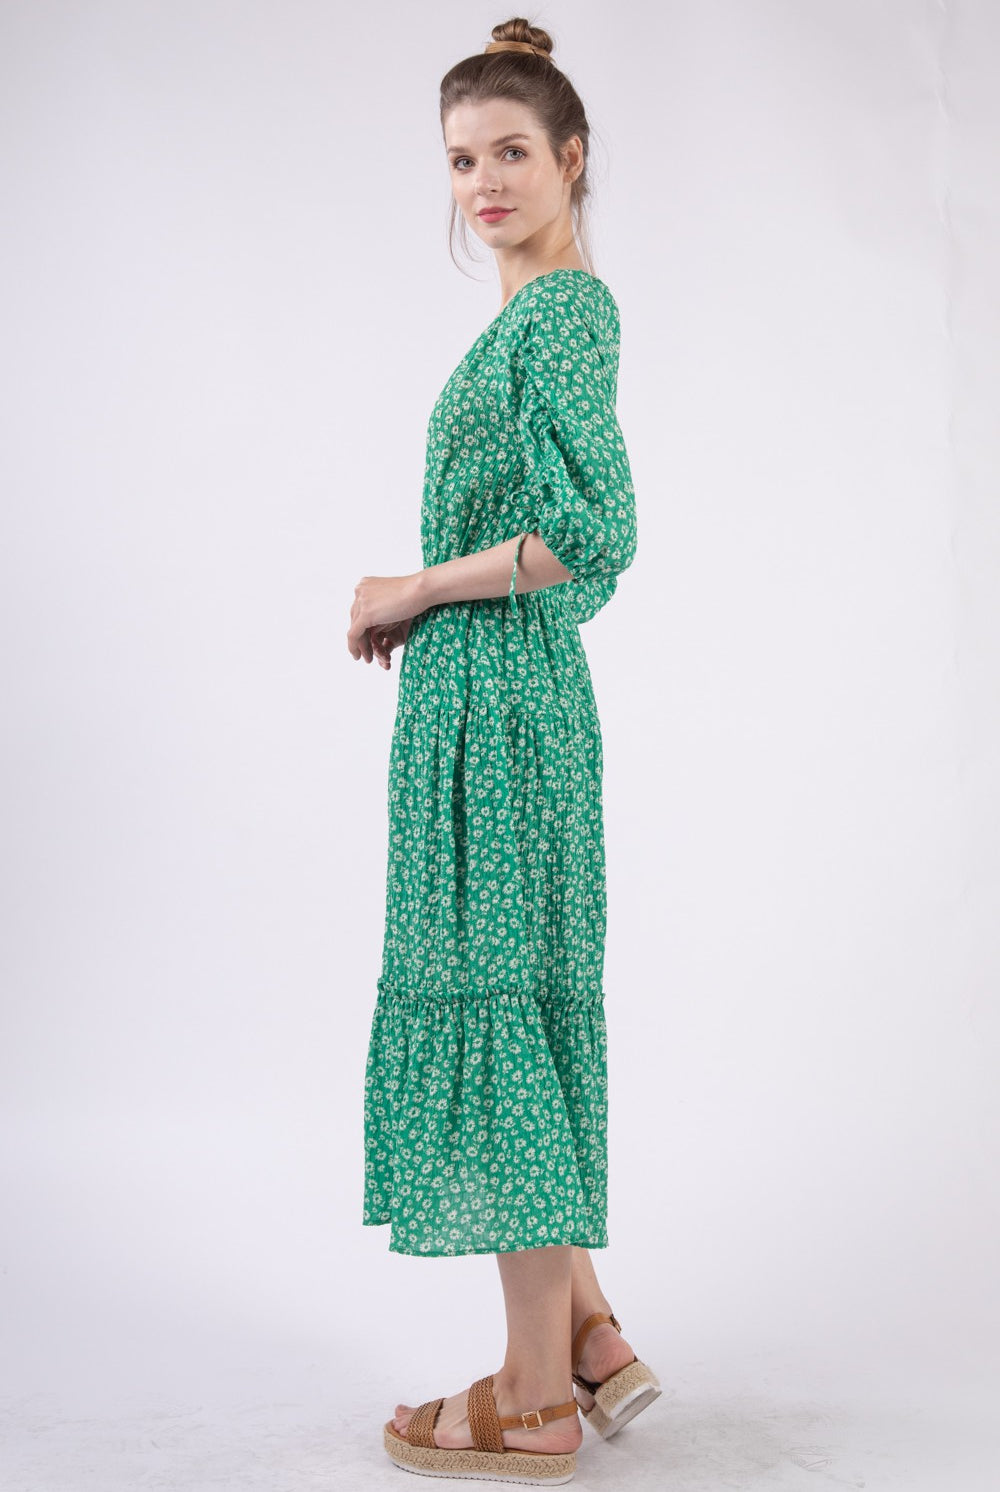 A poised woman in a fresh green midi dress adorned with a small white floral print. The dress features a cinched elastic waist, tie-up details at the three-quarter length sleeves, and a tiered skirt that adds movement. She pairs the look with natural brown strappy wedge sandals, perfect for a breezy day out.